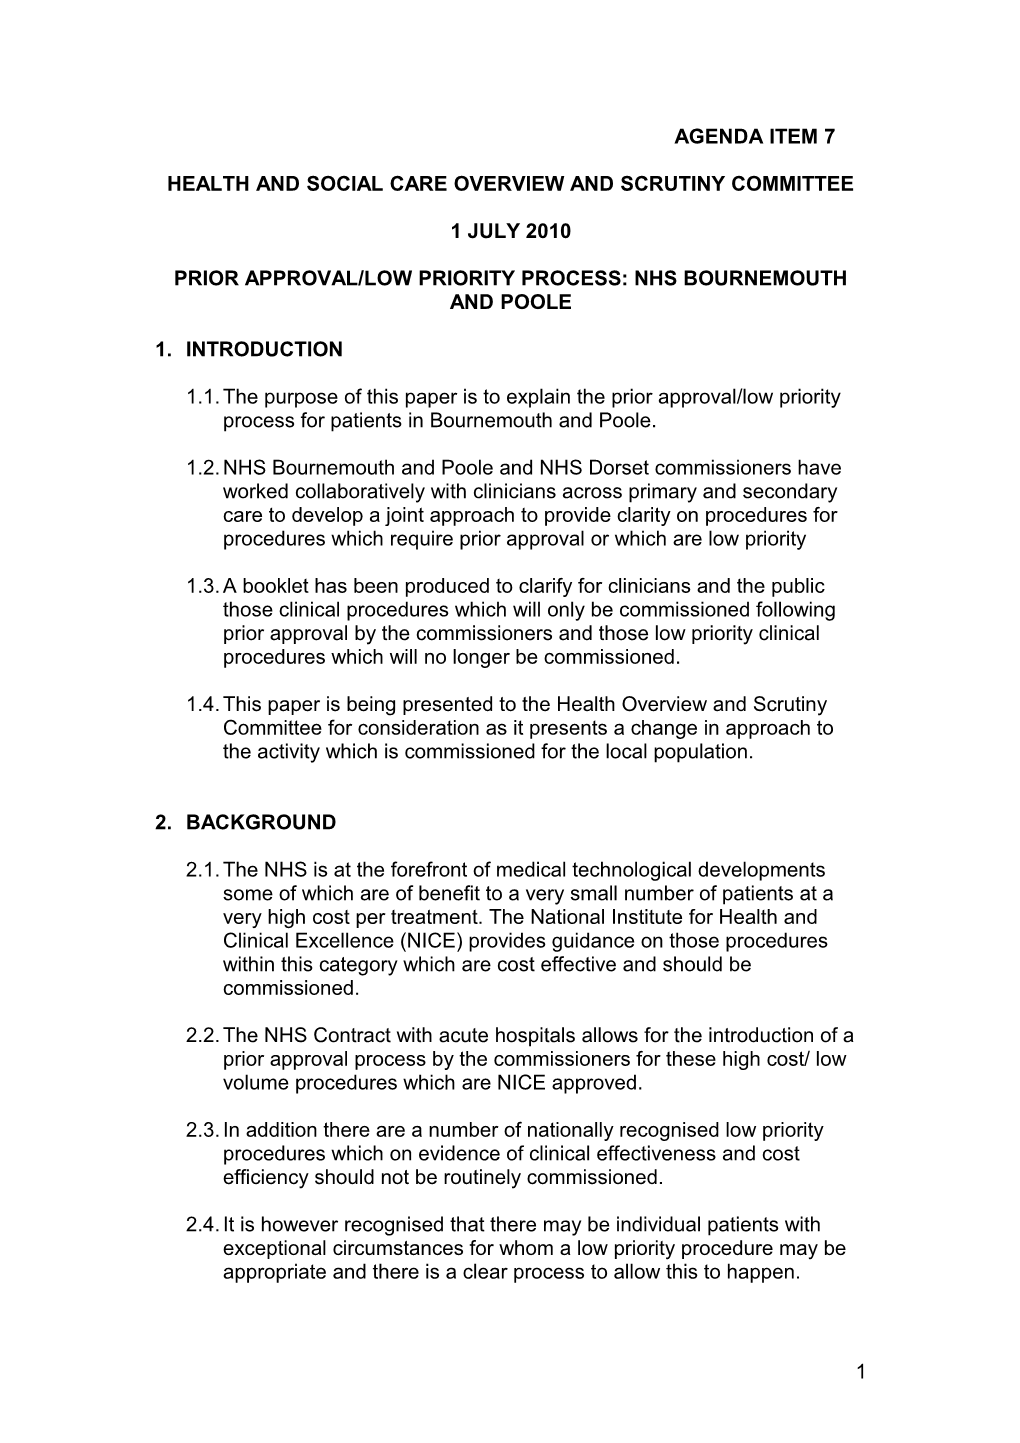 Prior Approval/Low Priority Process: Nhs Bournemouth and Poole